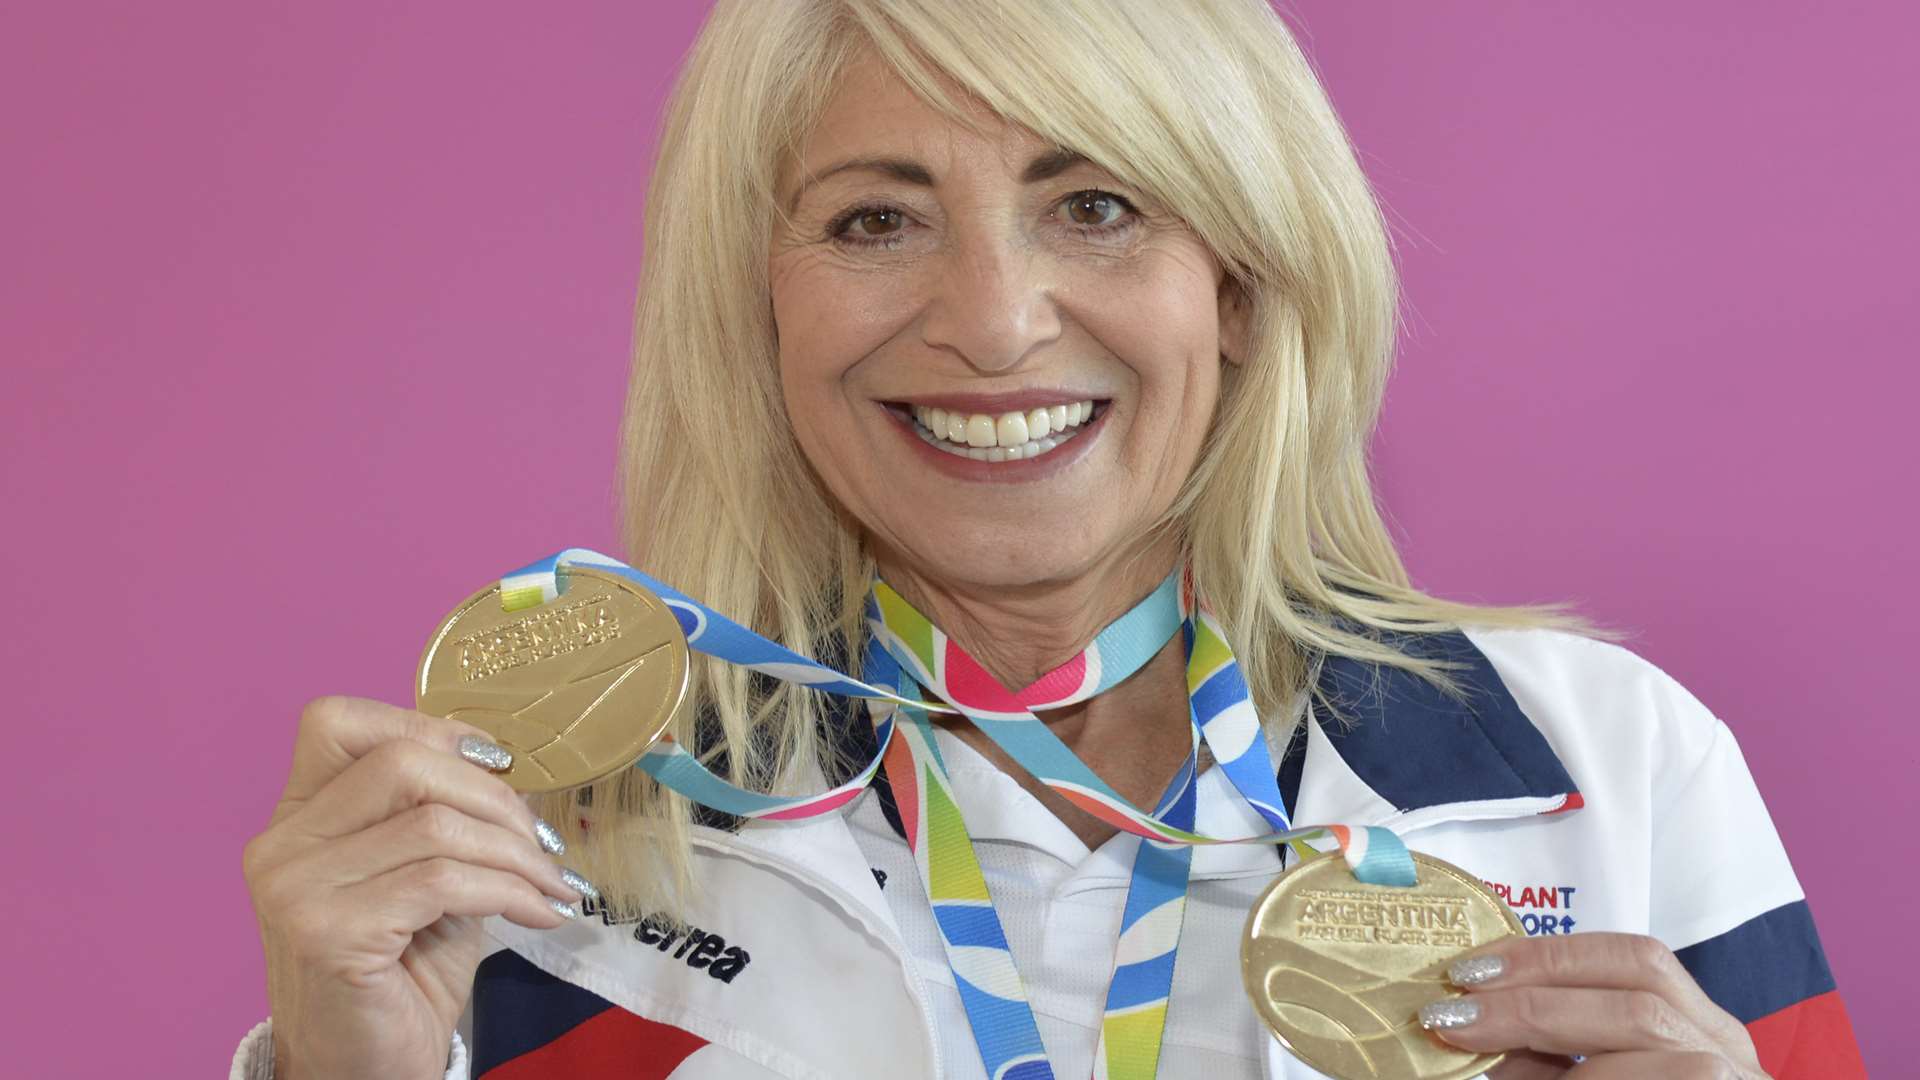 Sandie Tiley has won five medals at the World Transplant Games in Argentina